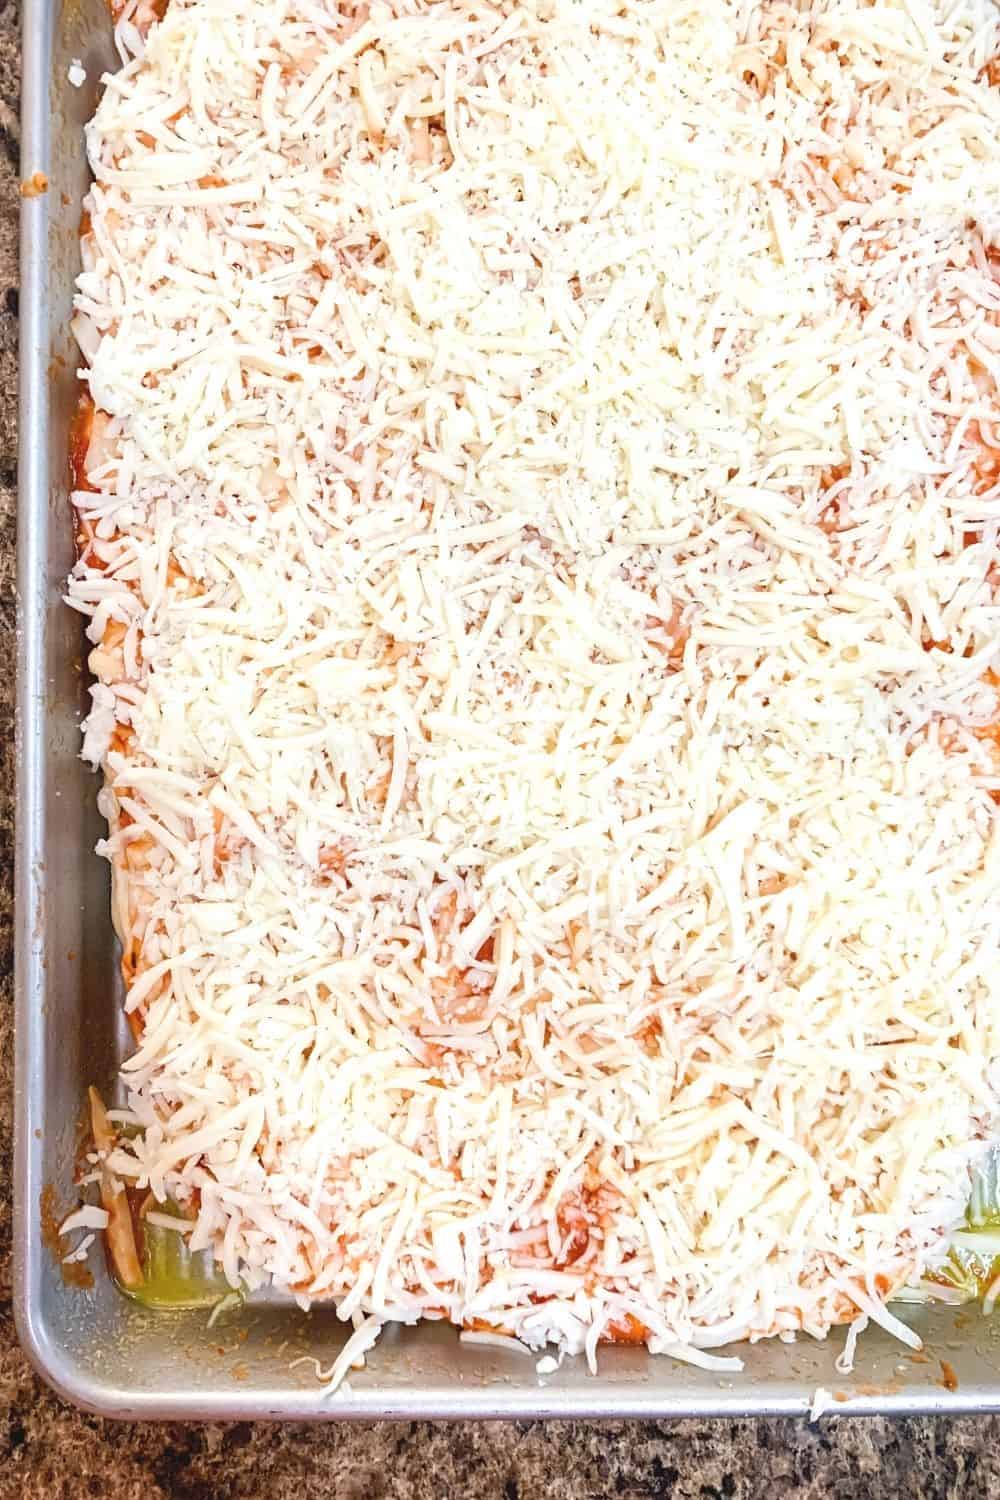 unbaked school pizza topped with sauce and shredded cheese